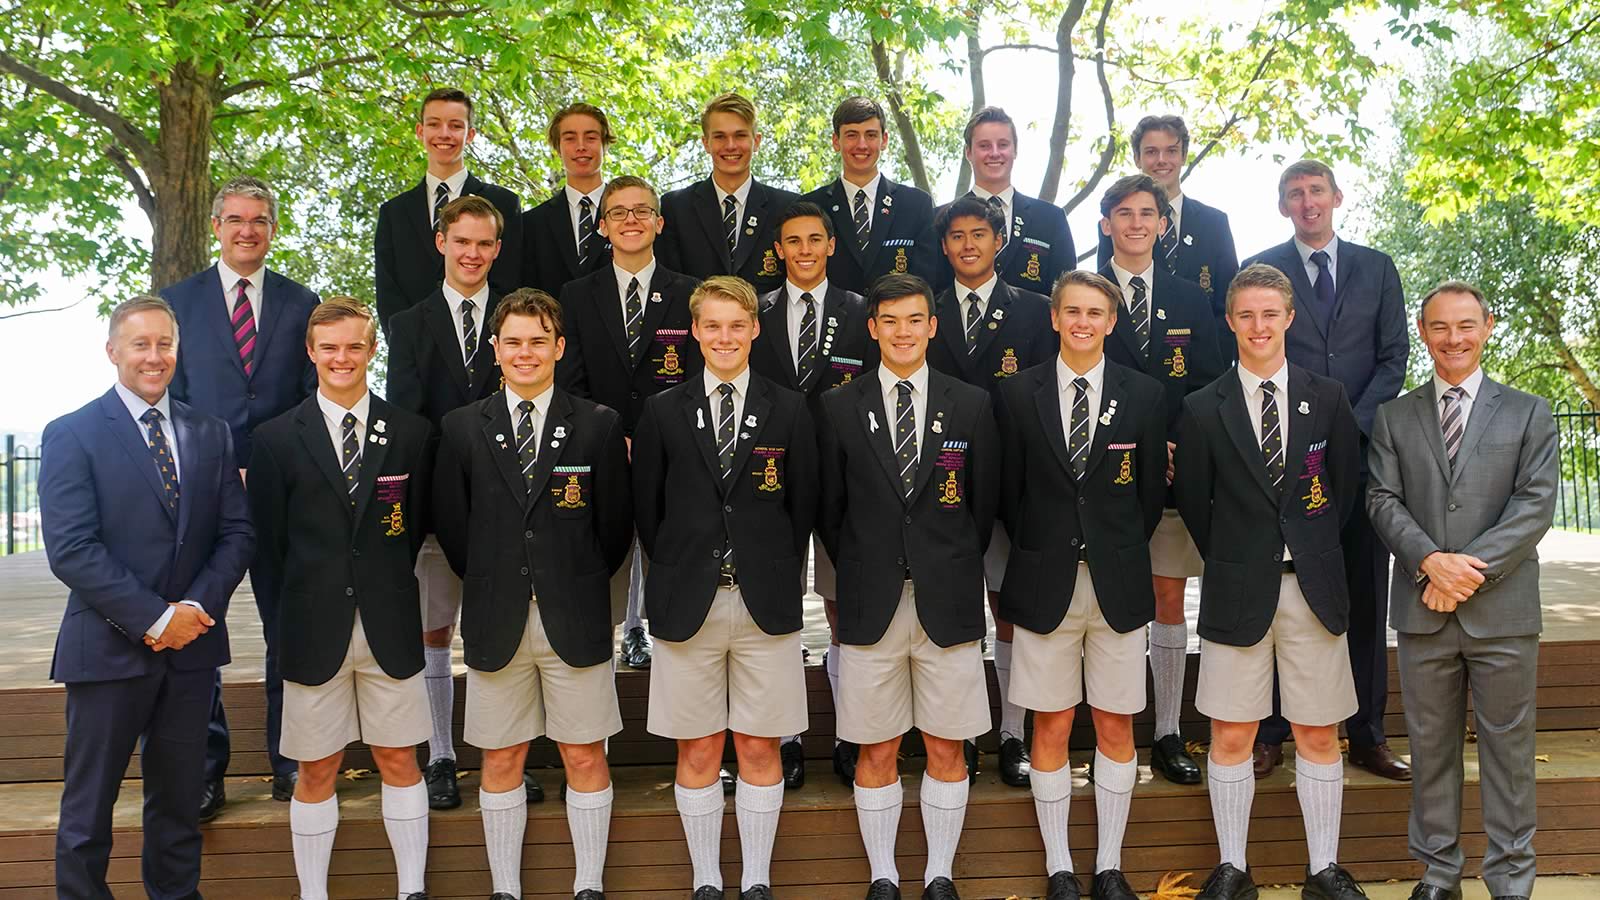 2019 School Captains and Prefects pictured with Headmaster Dr Rob McEwan, Deputy Headmaster Mr Richard Davies, Head of Senior School Mr Roger McNamara and Chairperson of the Board Mr Gene Phair.